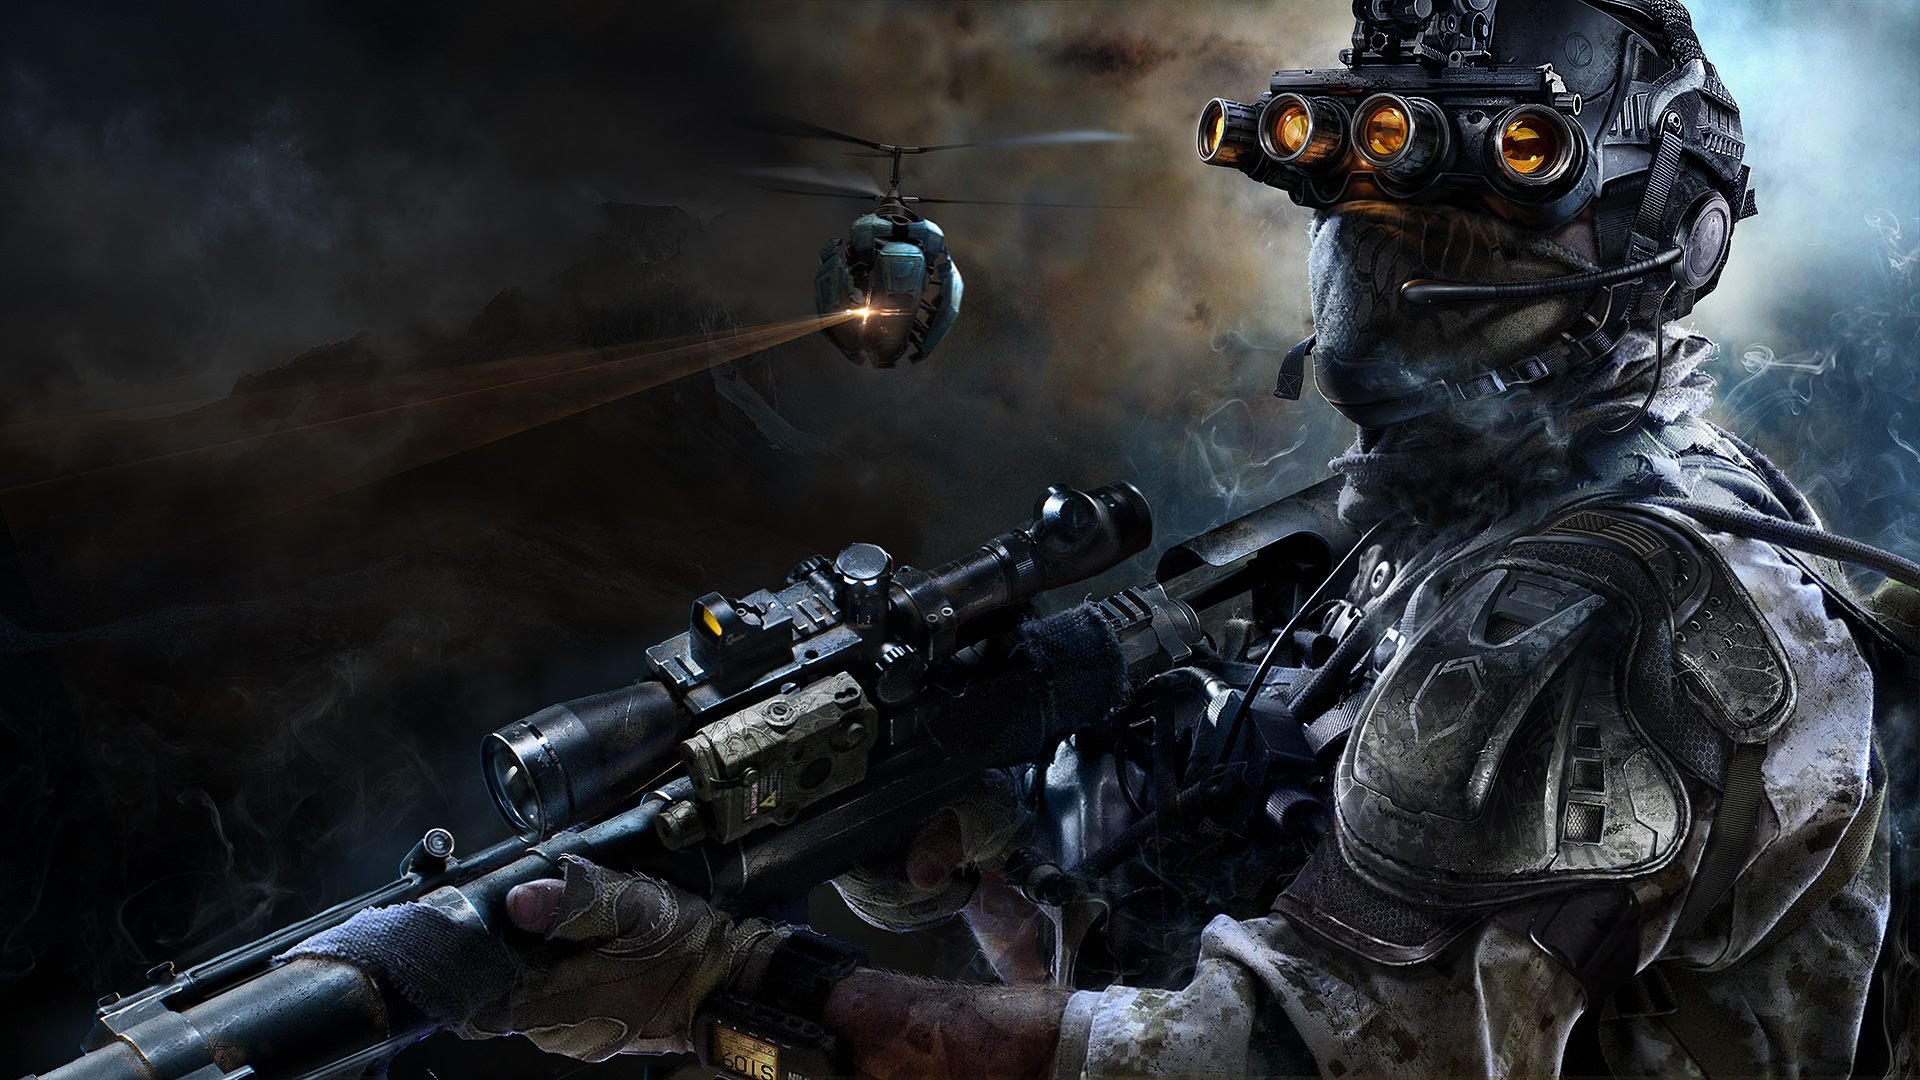 Download hd 1920x1080 Sniper: Ghost Warrior 3 desktop background ID:232080 for free